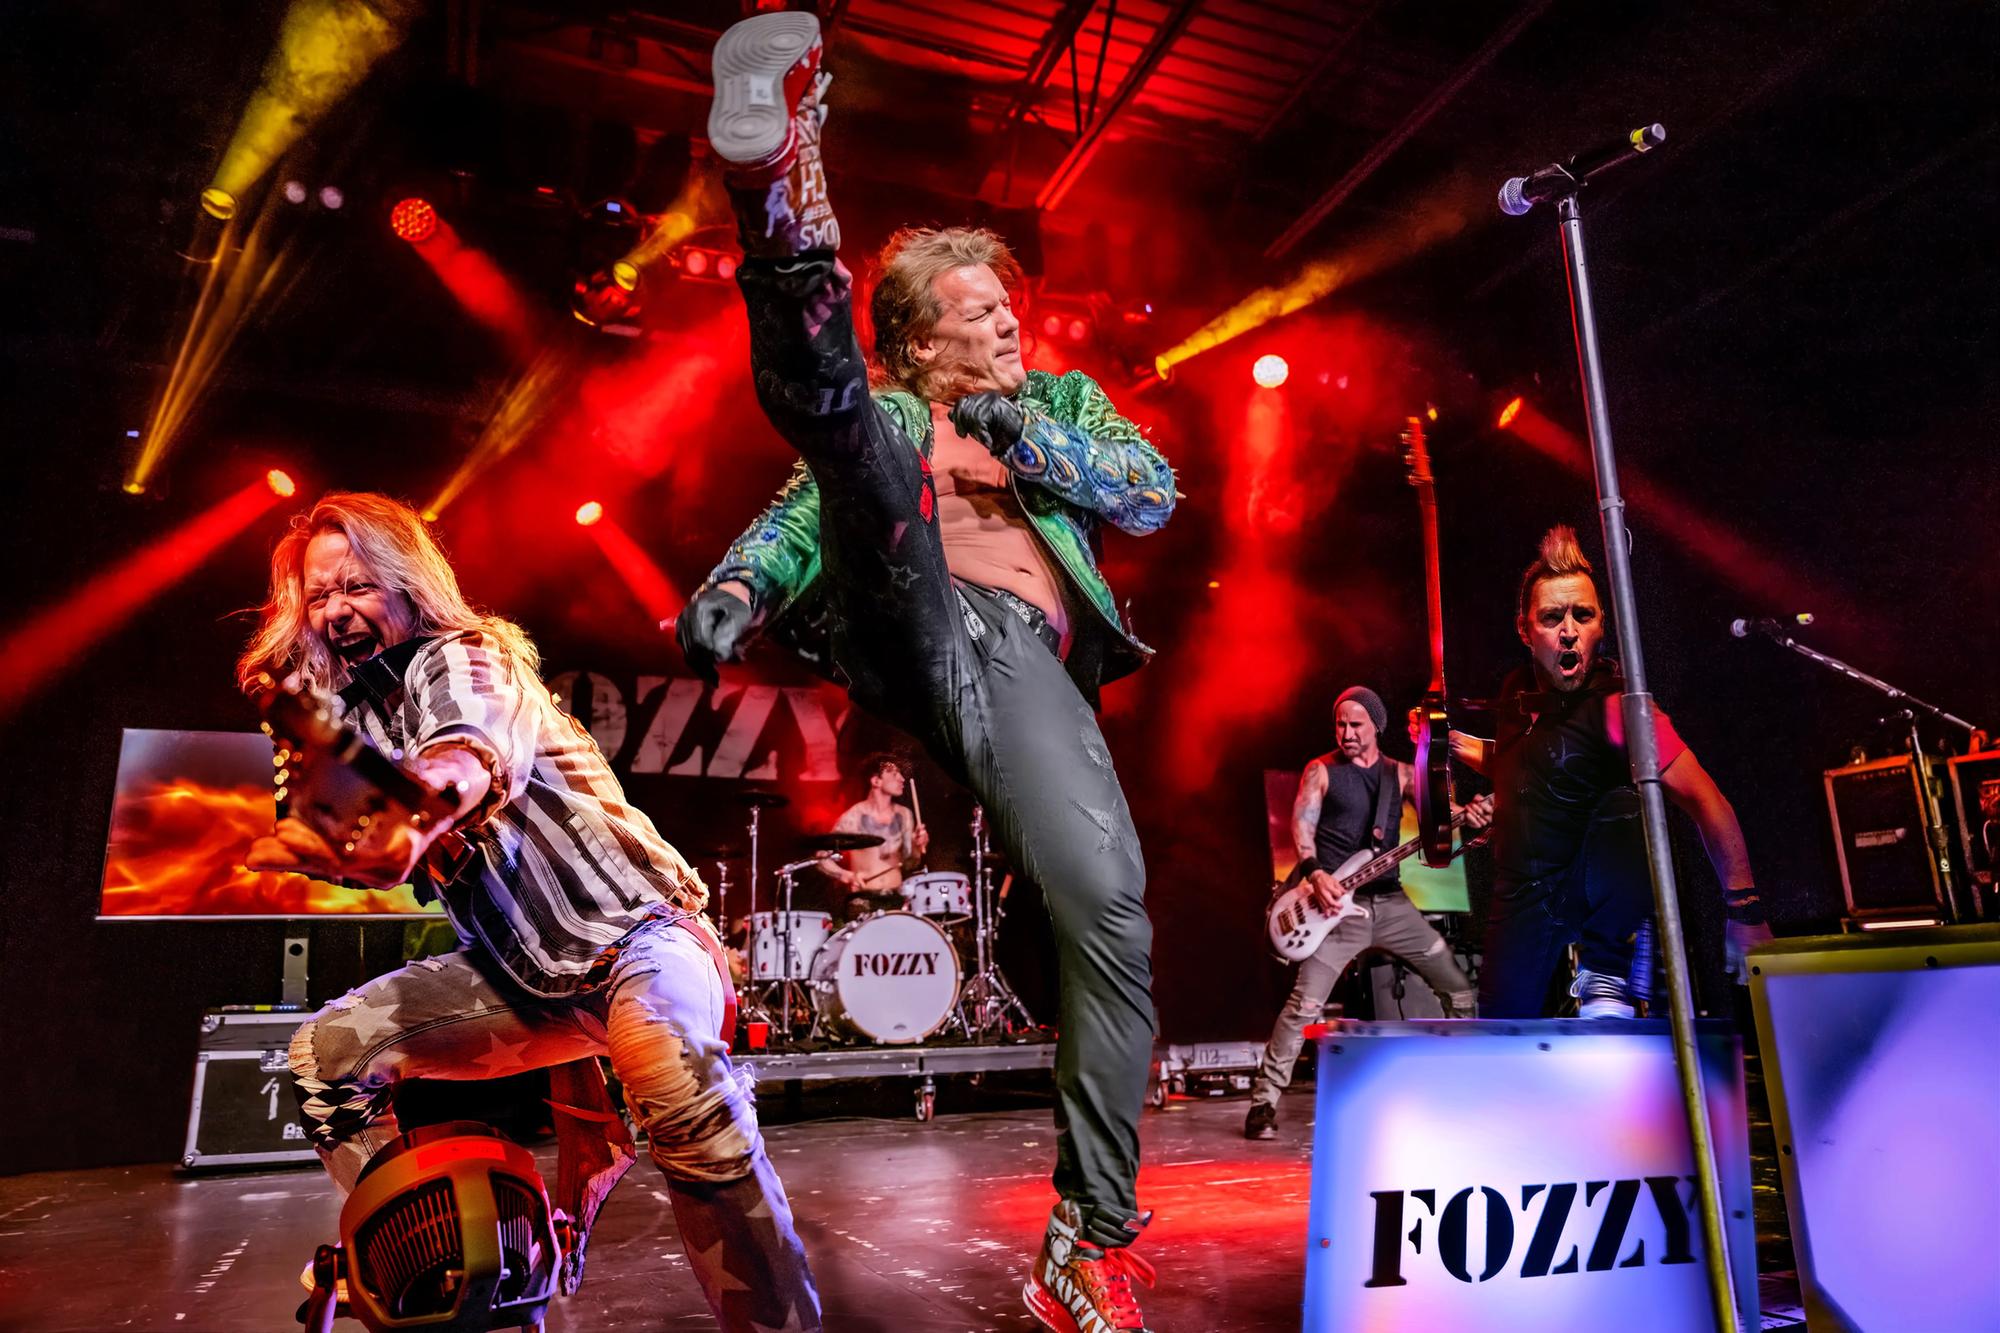 Chris Jericho to bring Fozzy band to Roadmender in